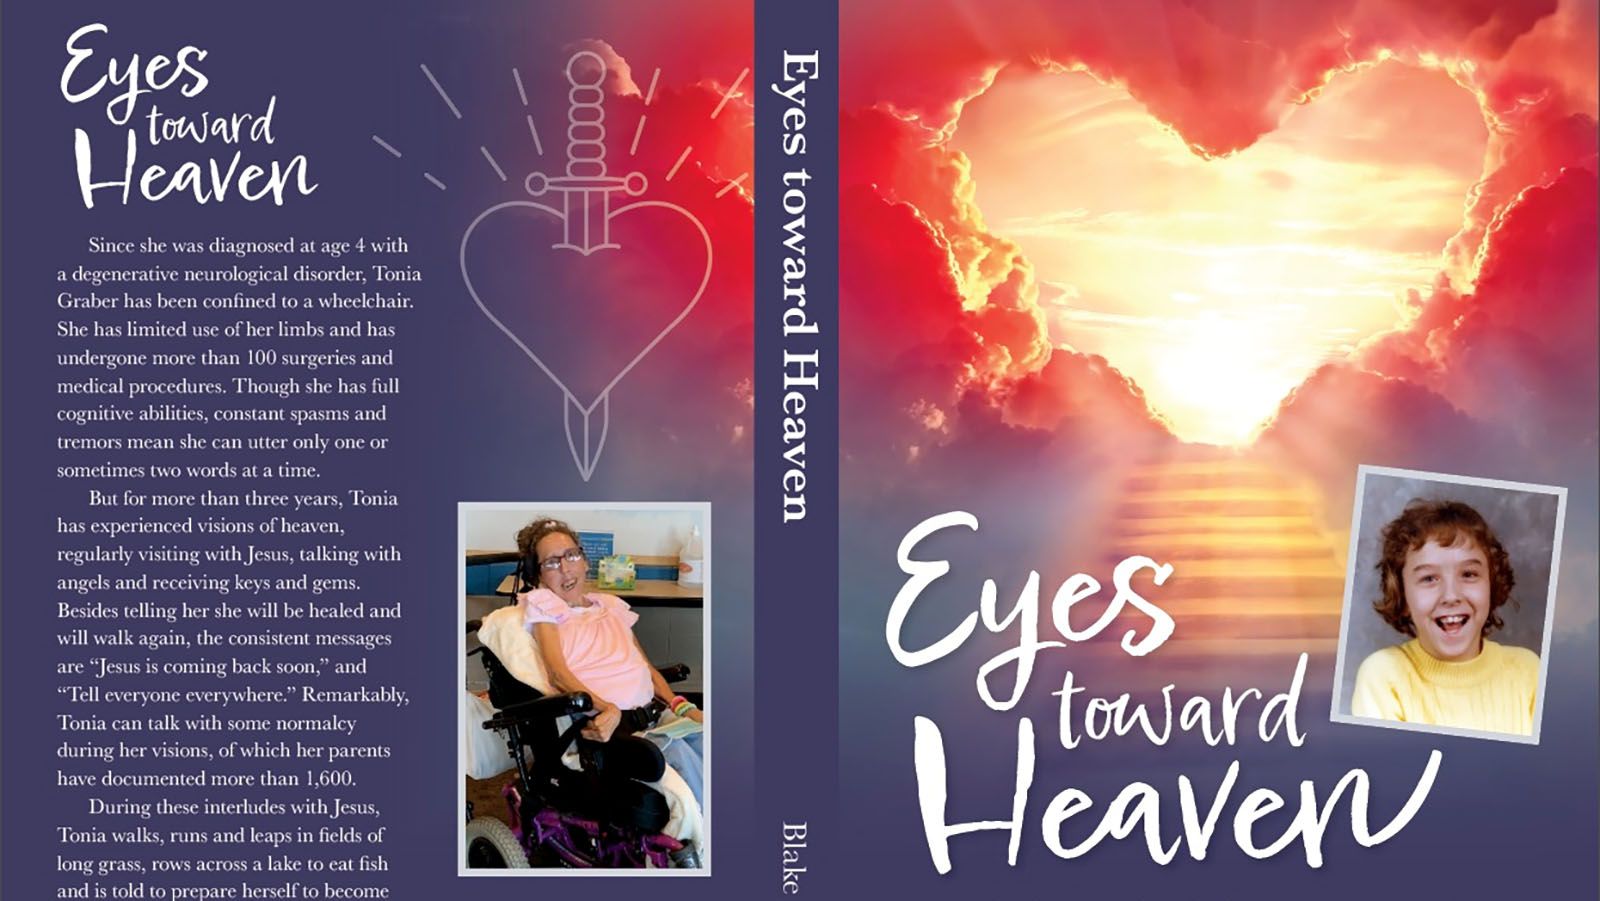 Blake Sebring will be at This & That on Feb. 11 to sign his book "Eyes Toward Heaven."